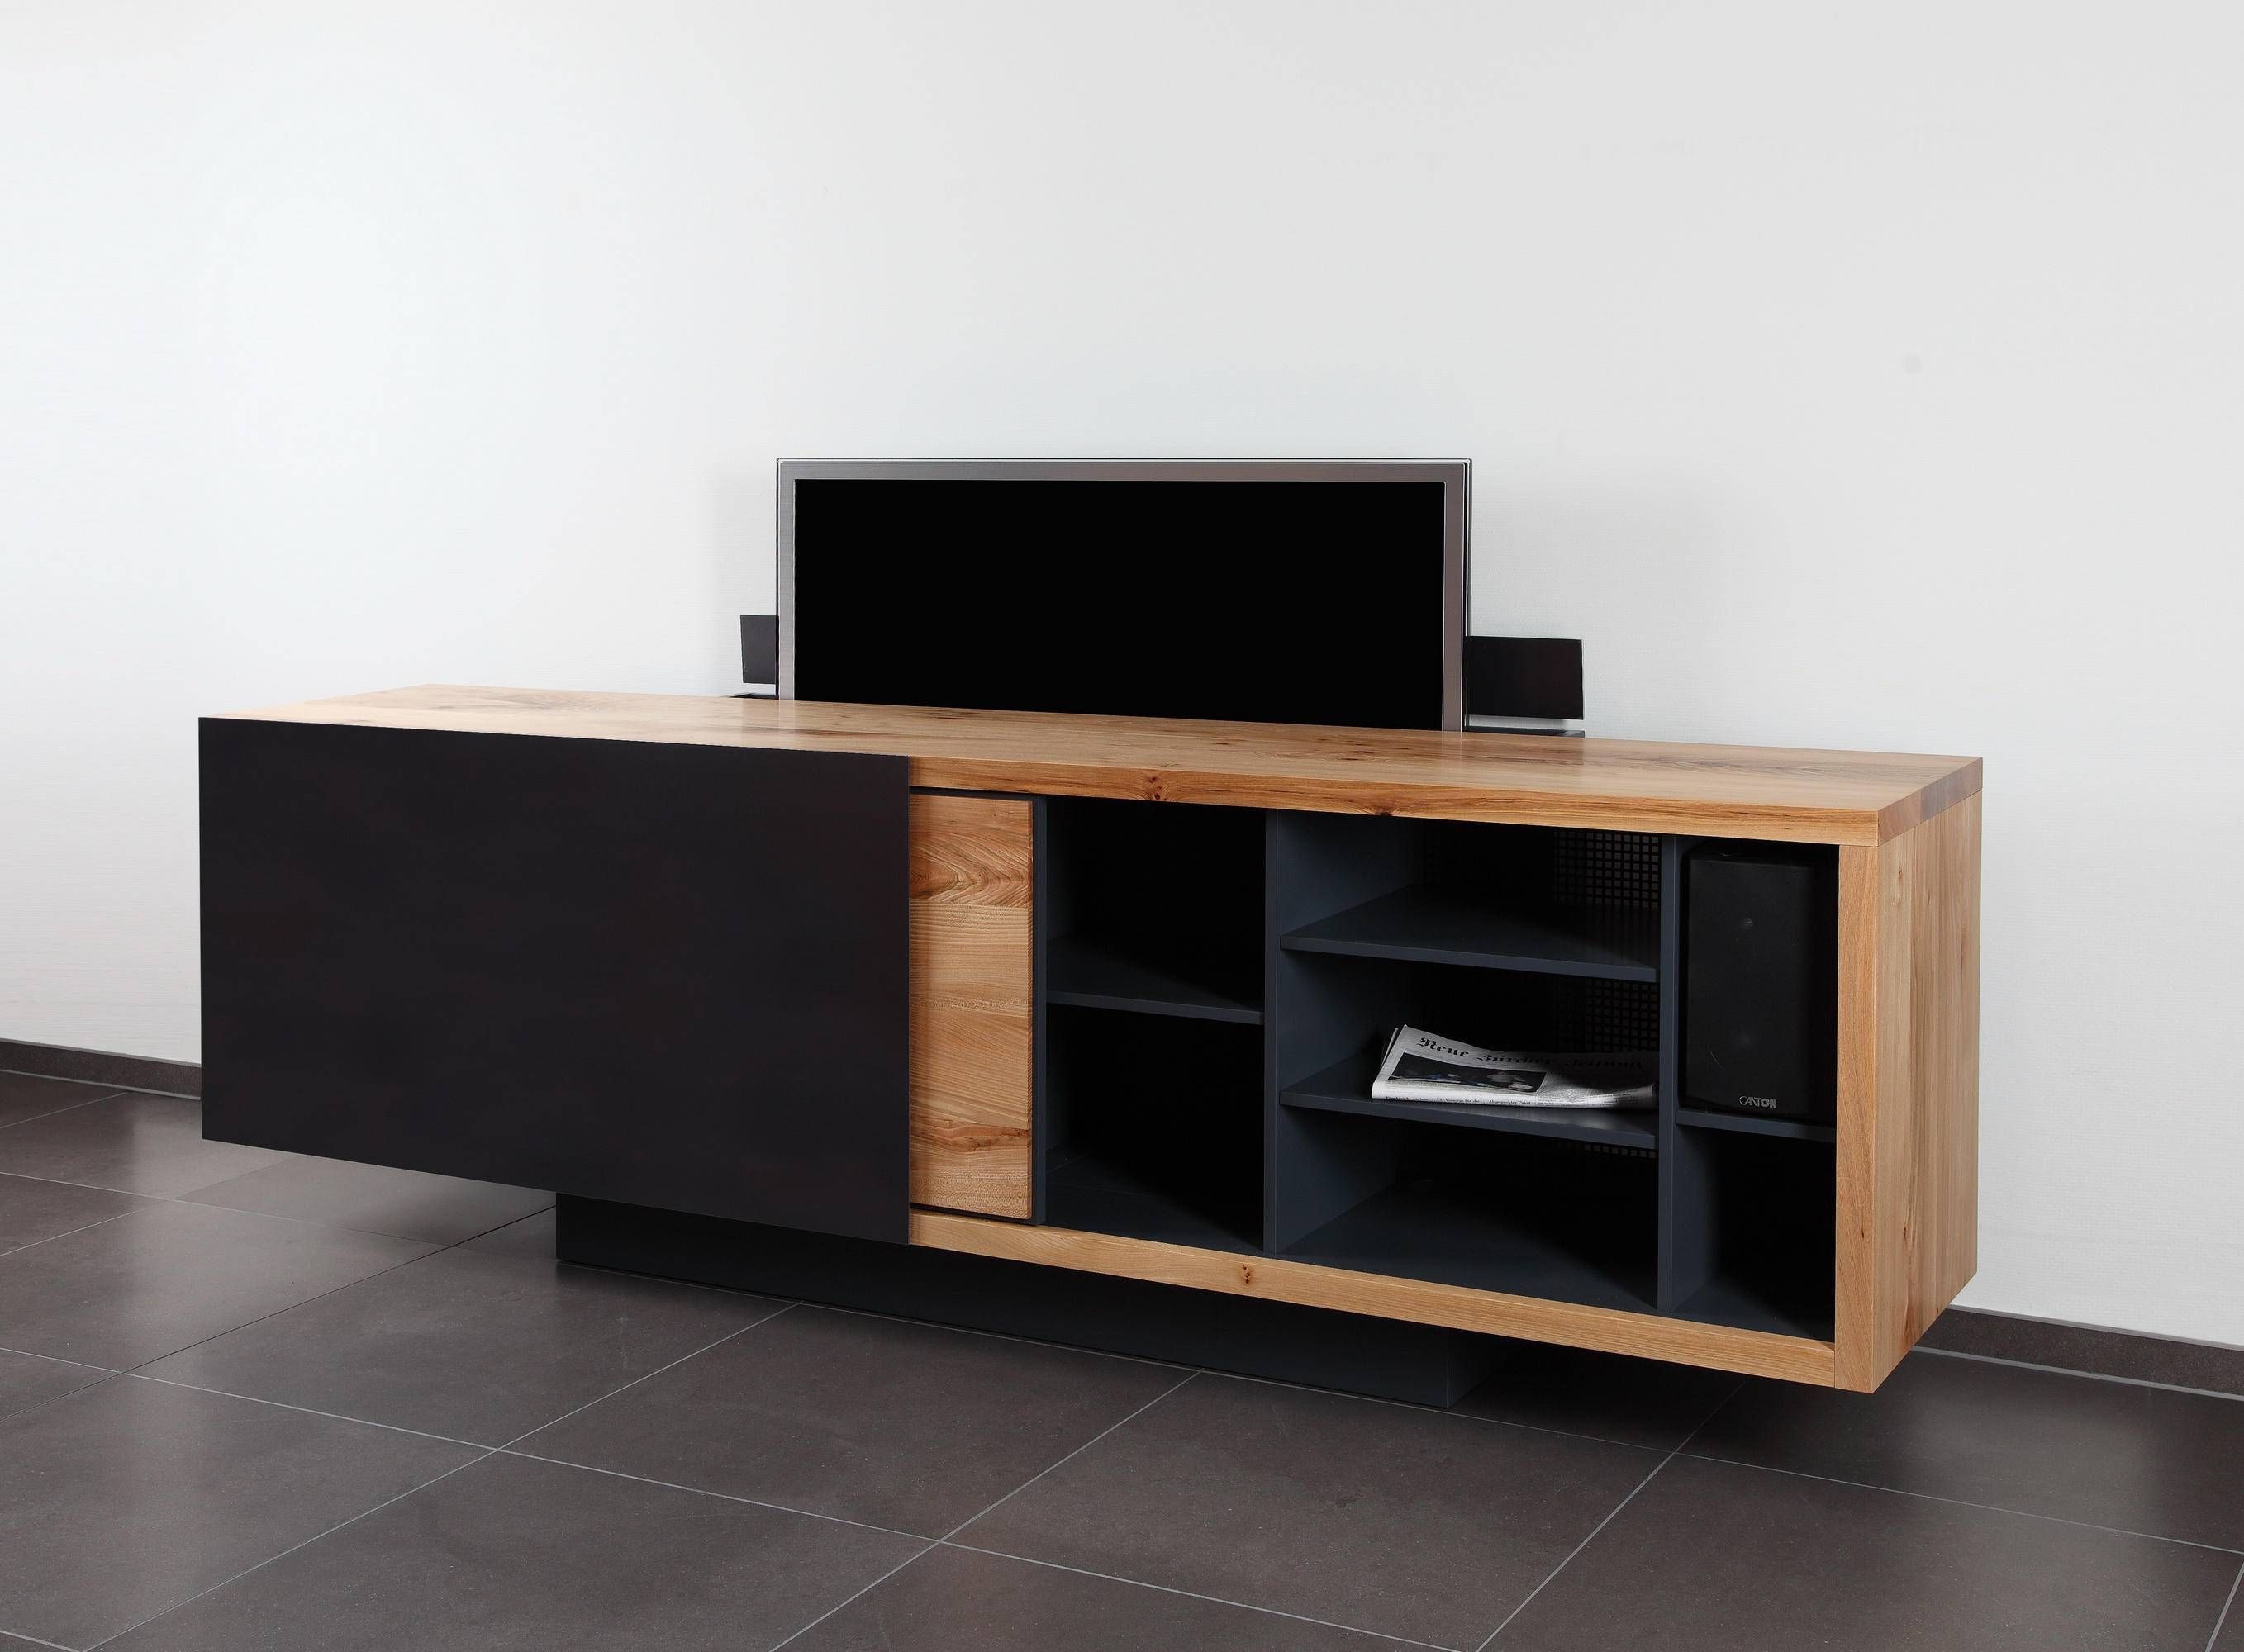 Ign. B2. Tv. Sideboard. – Multimedia Sideboards From Ign (View 5 of 30)